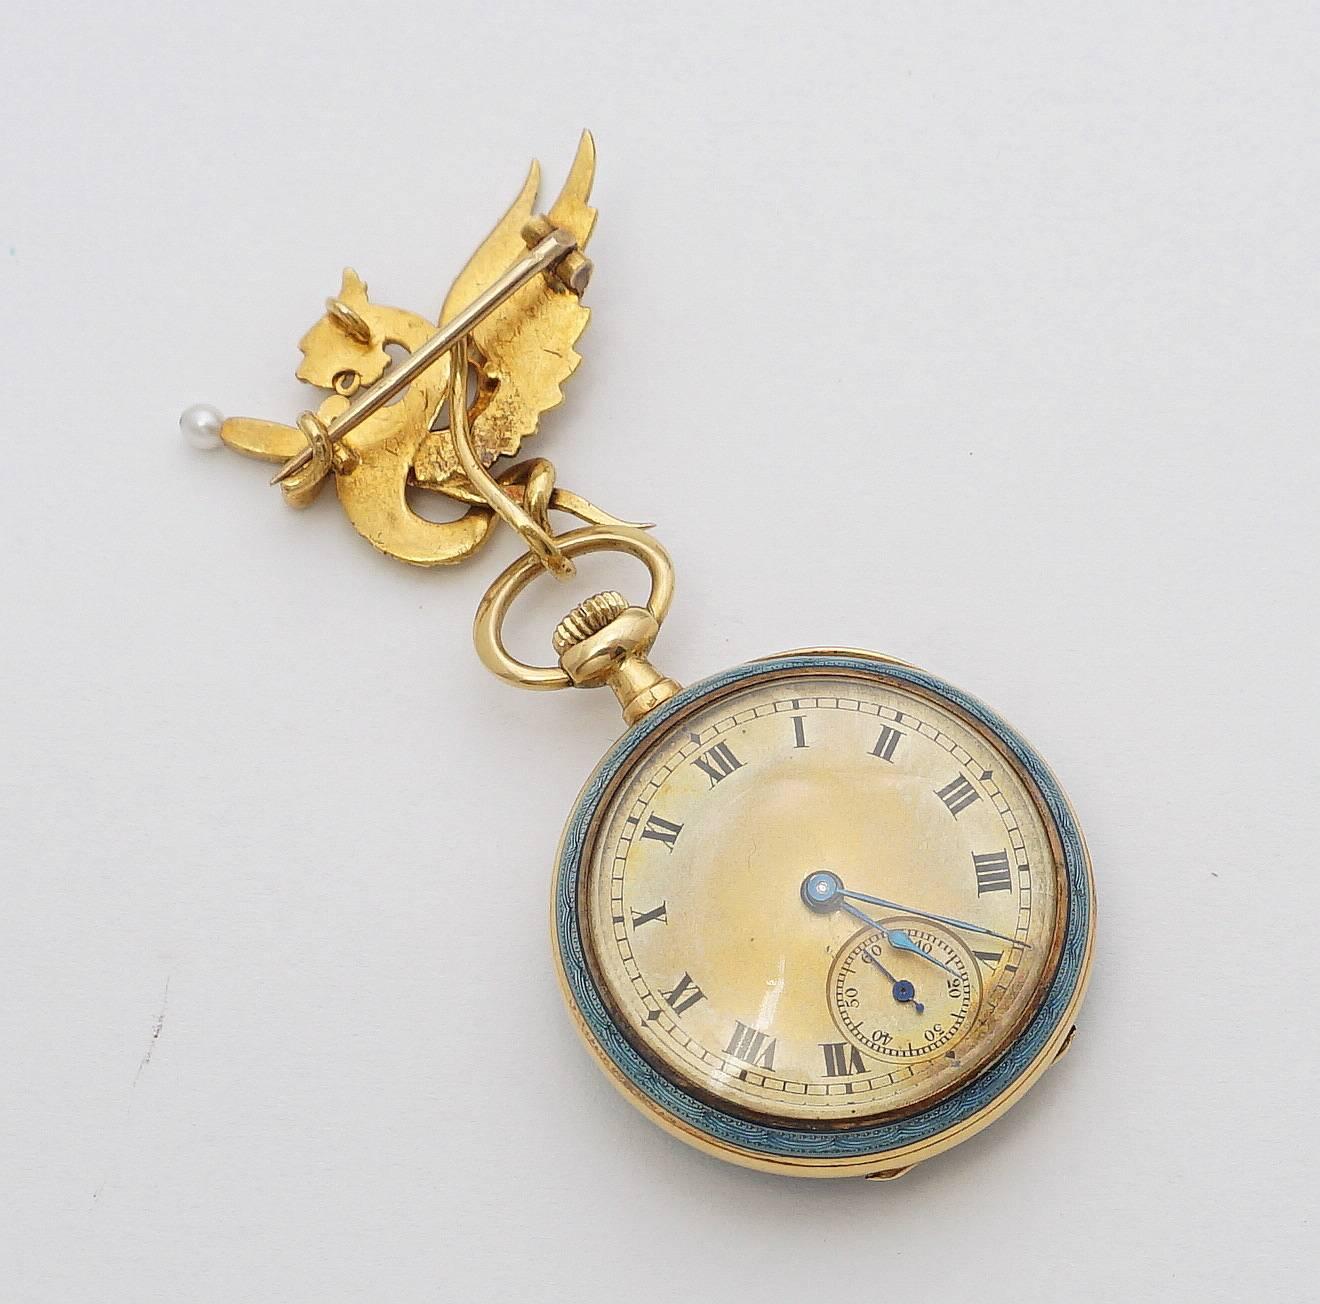 Beacon Hill Jewelers Presents:

A beautiful enameled pendant pocket watch featuring Diamonds, Natural Pearls, and a griffon form brooch from which the pocket watch is suspended. In superb condition, this French made watch is crafted of 18 karat